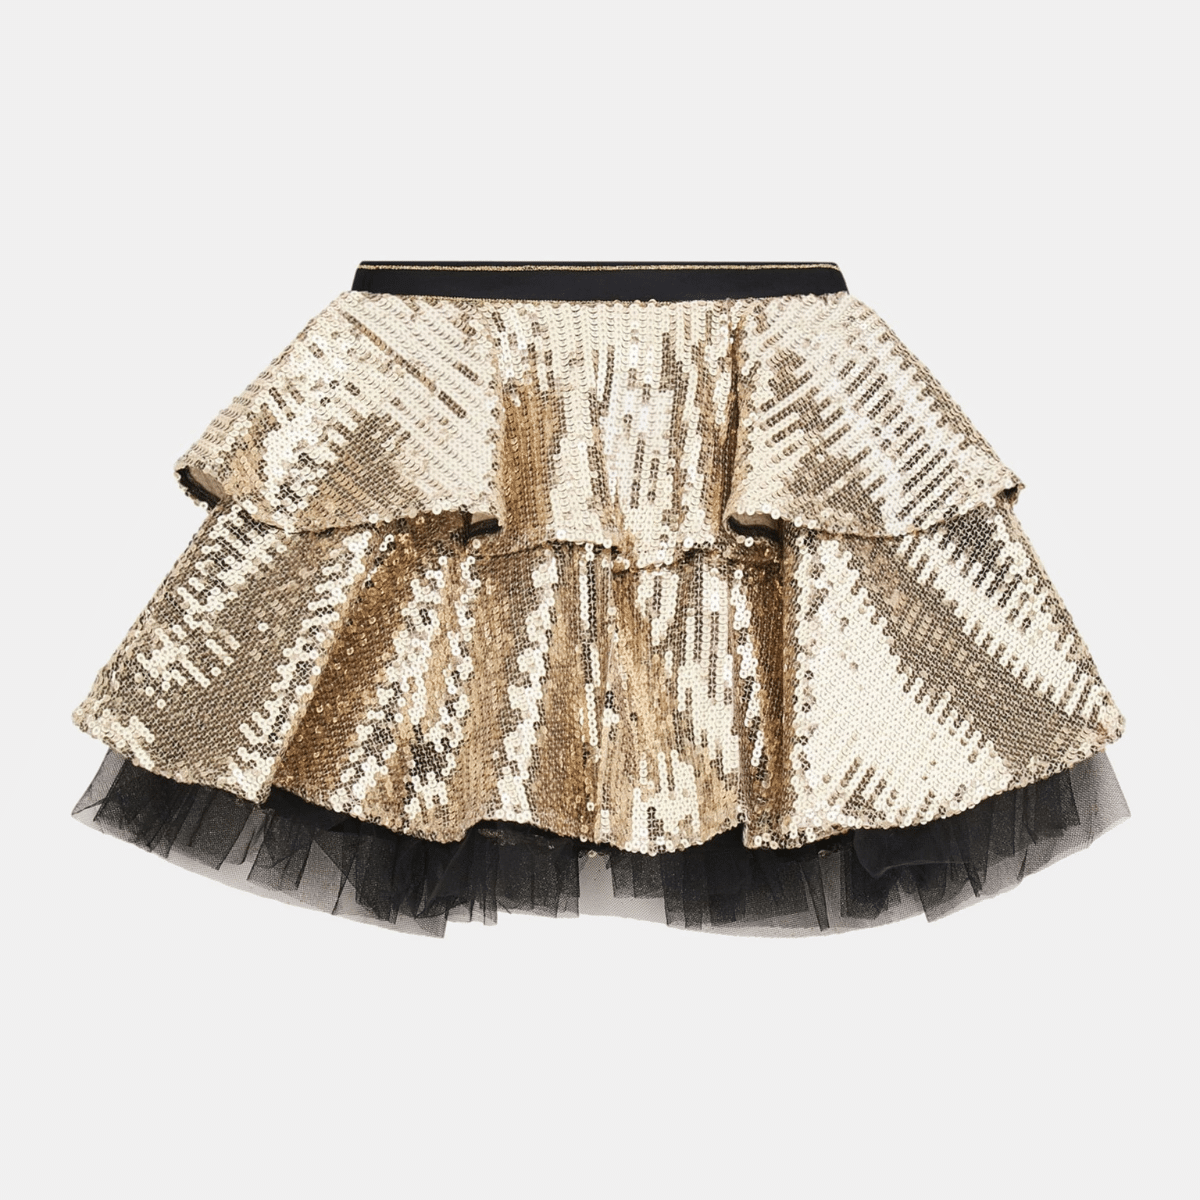 Guess sequin gold midi skirt